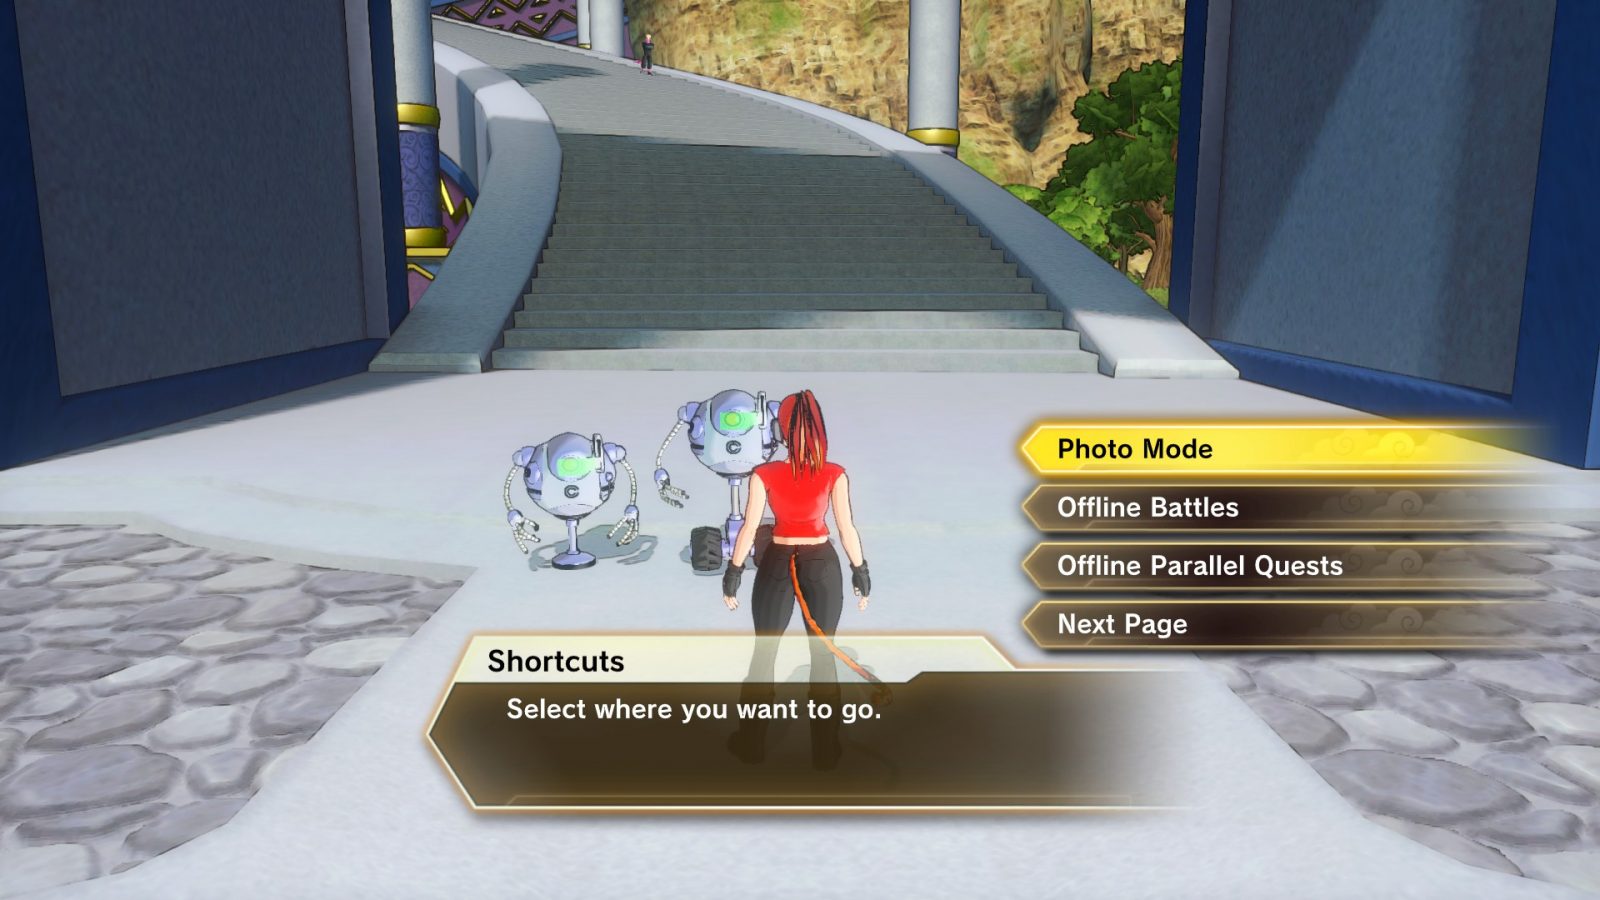 Dragon Ball XenoVerse: How to find Dragon Balls Easily, Summoning Shenron,  Wish list 